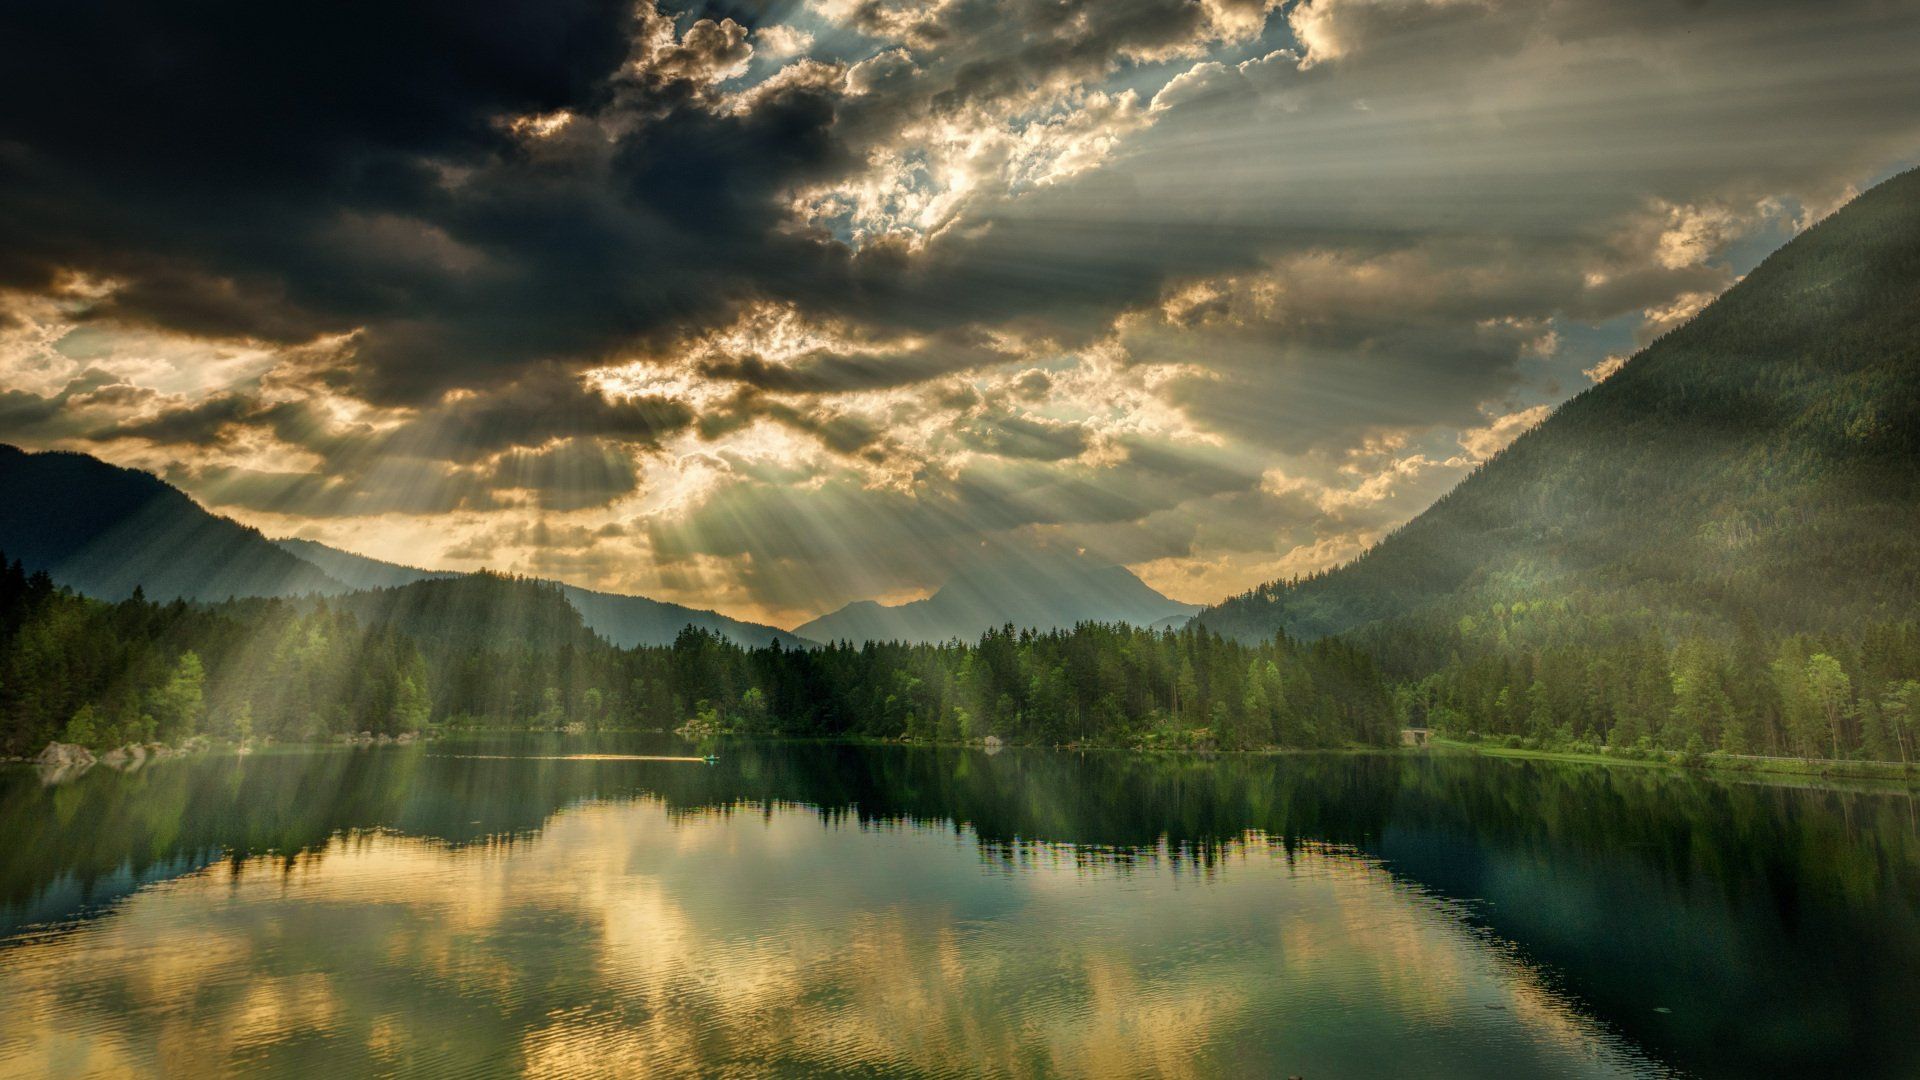 the sun is shining through the clouds over a lake surrounded by mountains .